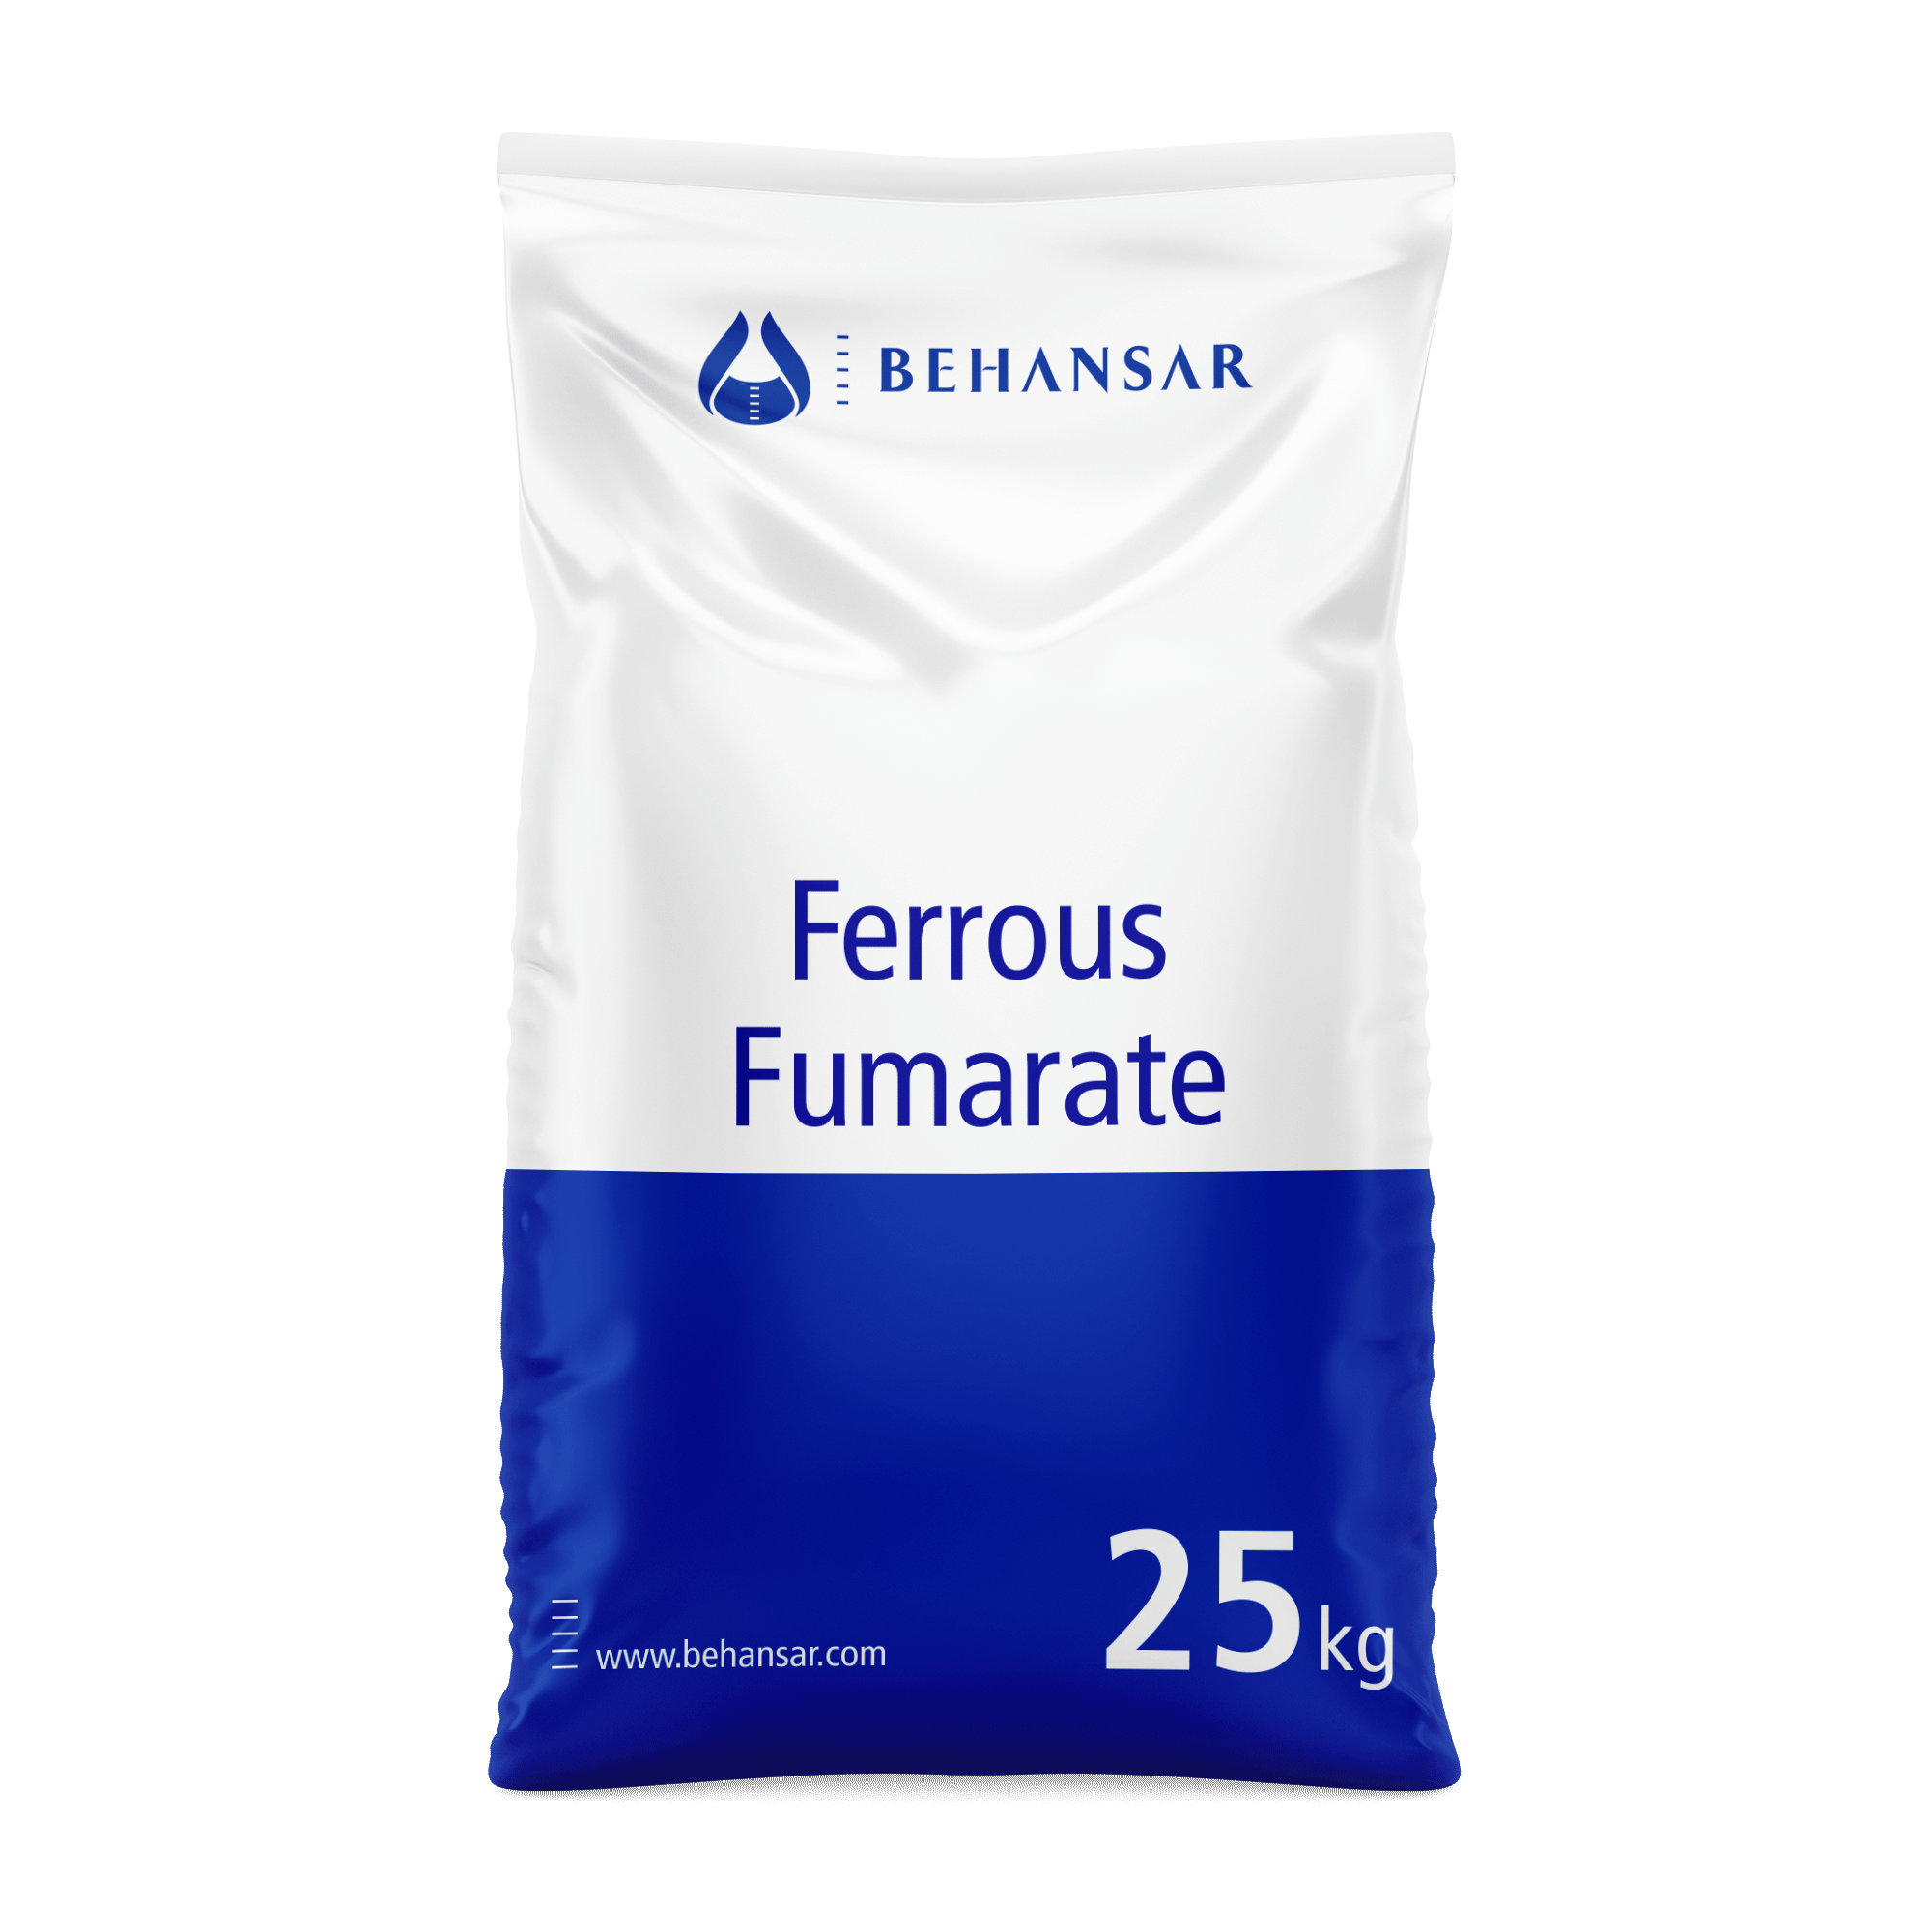 Ferrous Fumarate is one of the products of Behansar Co